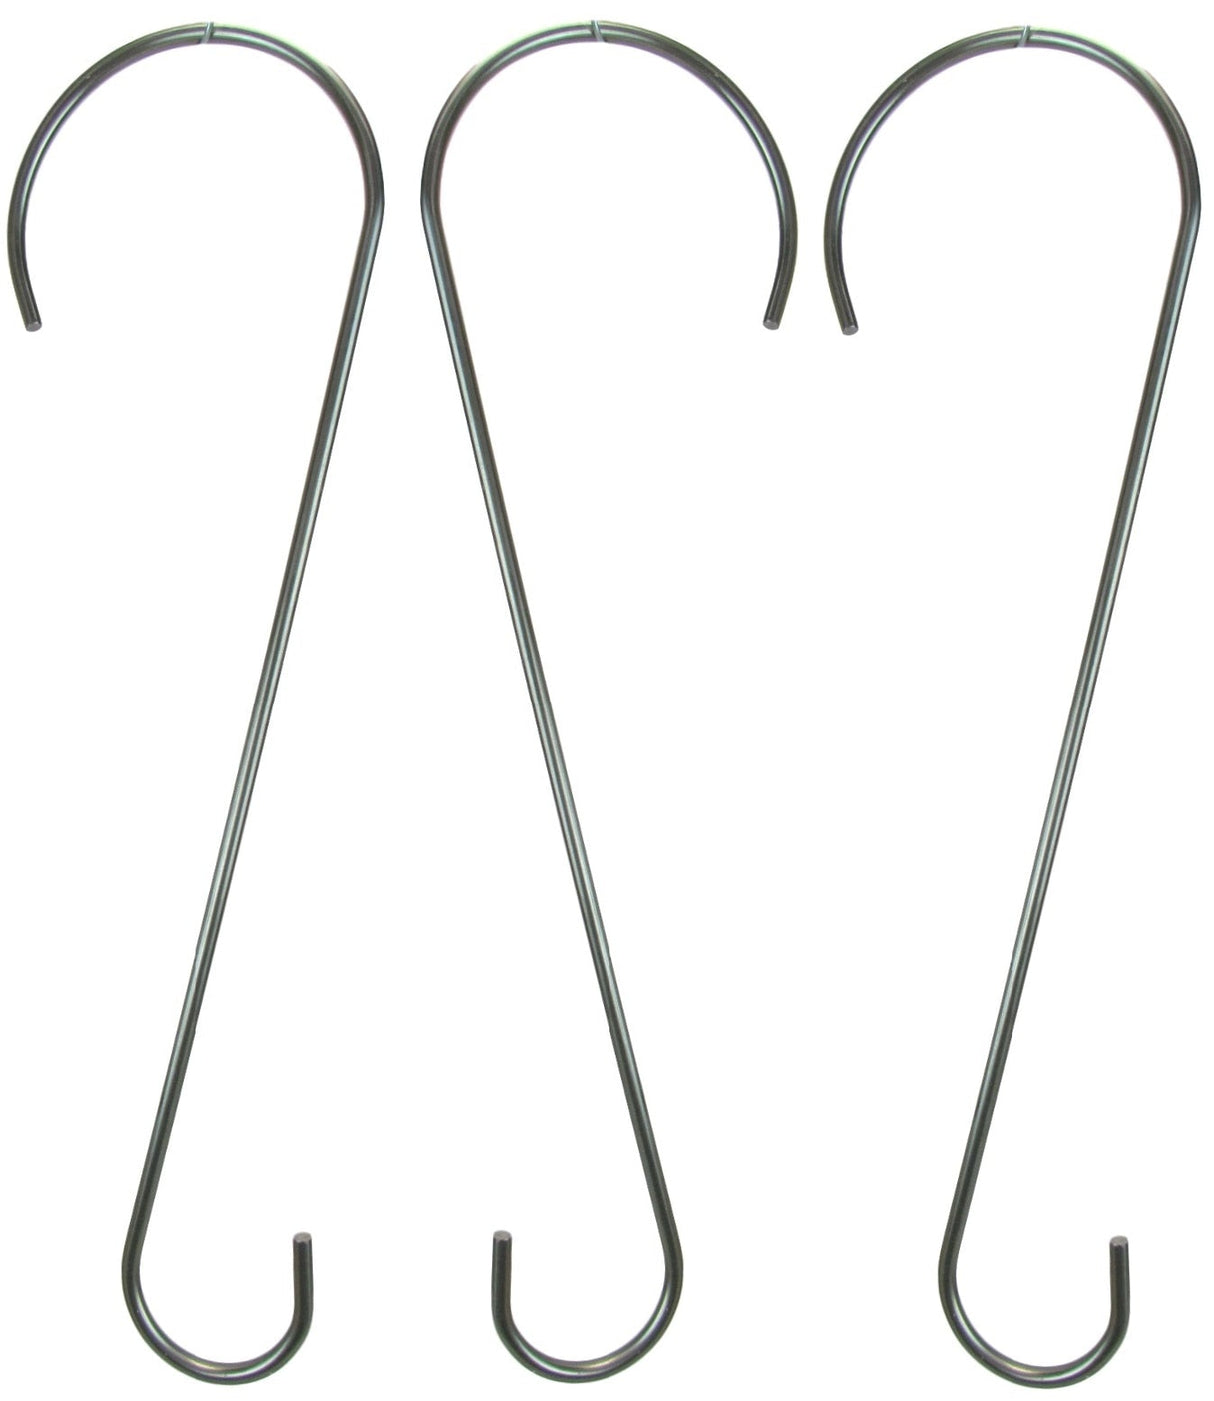 Heavy Duty Stainless Steel Branch Hook, Birdhouse, Feeder & Hanging Baskets - 18 in. (1, 2, 3, 4 and 6 Packs) - JCS Wildlife